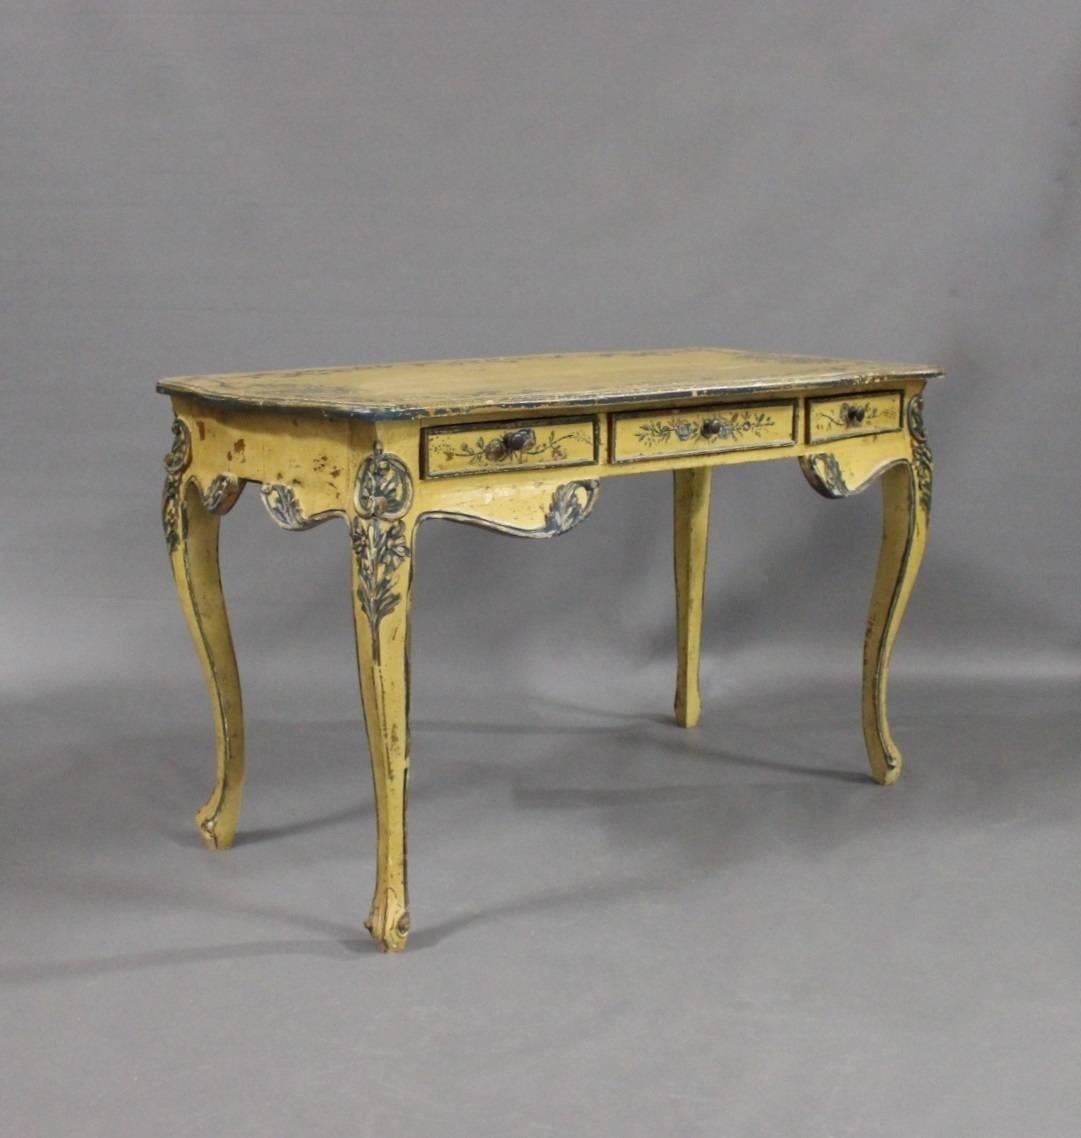 Antique painted desk in light colors from France, circa 1930s. The table is in great vintage condition.